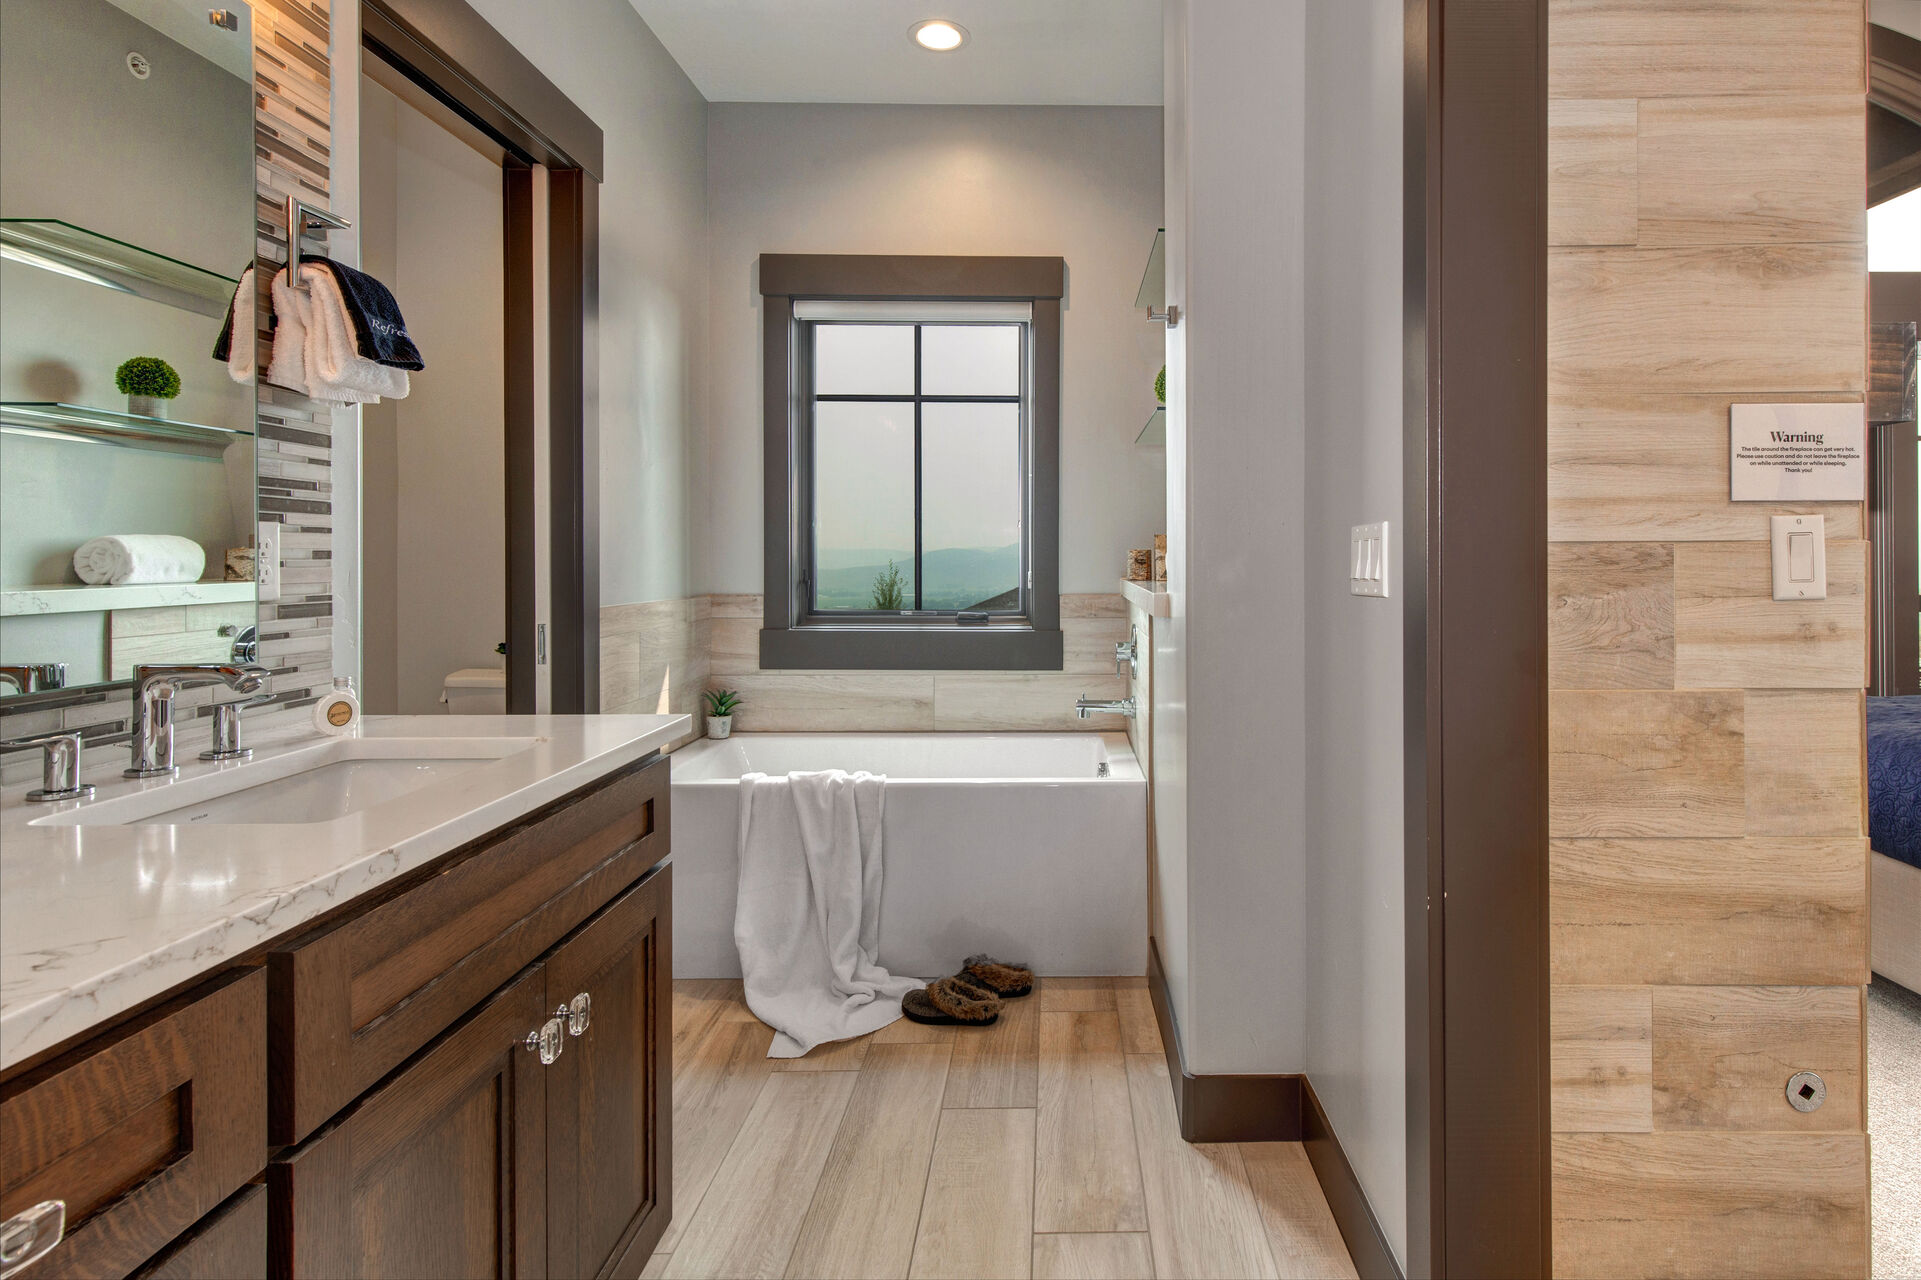 Master Bathroom with dual vanities, oversized tiled shower, private washroom, and jetted tub